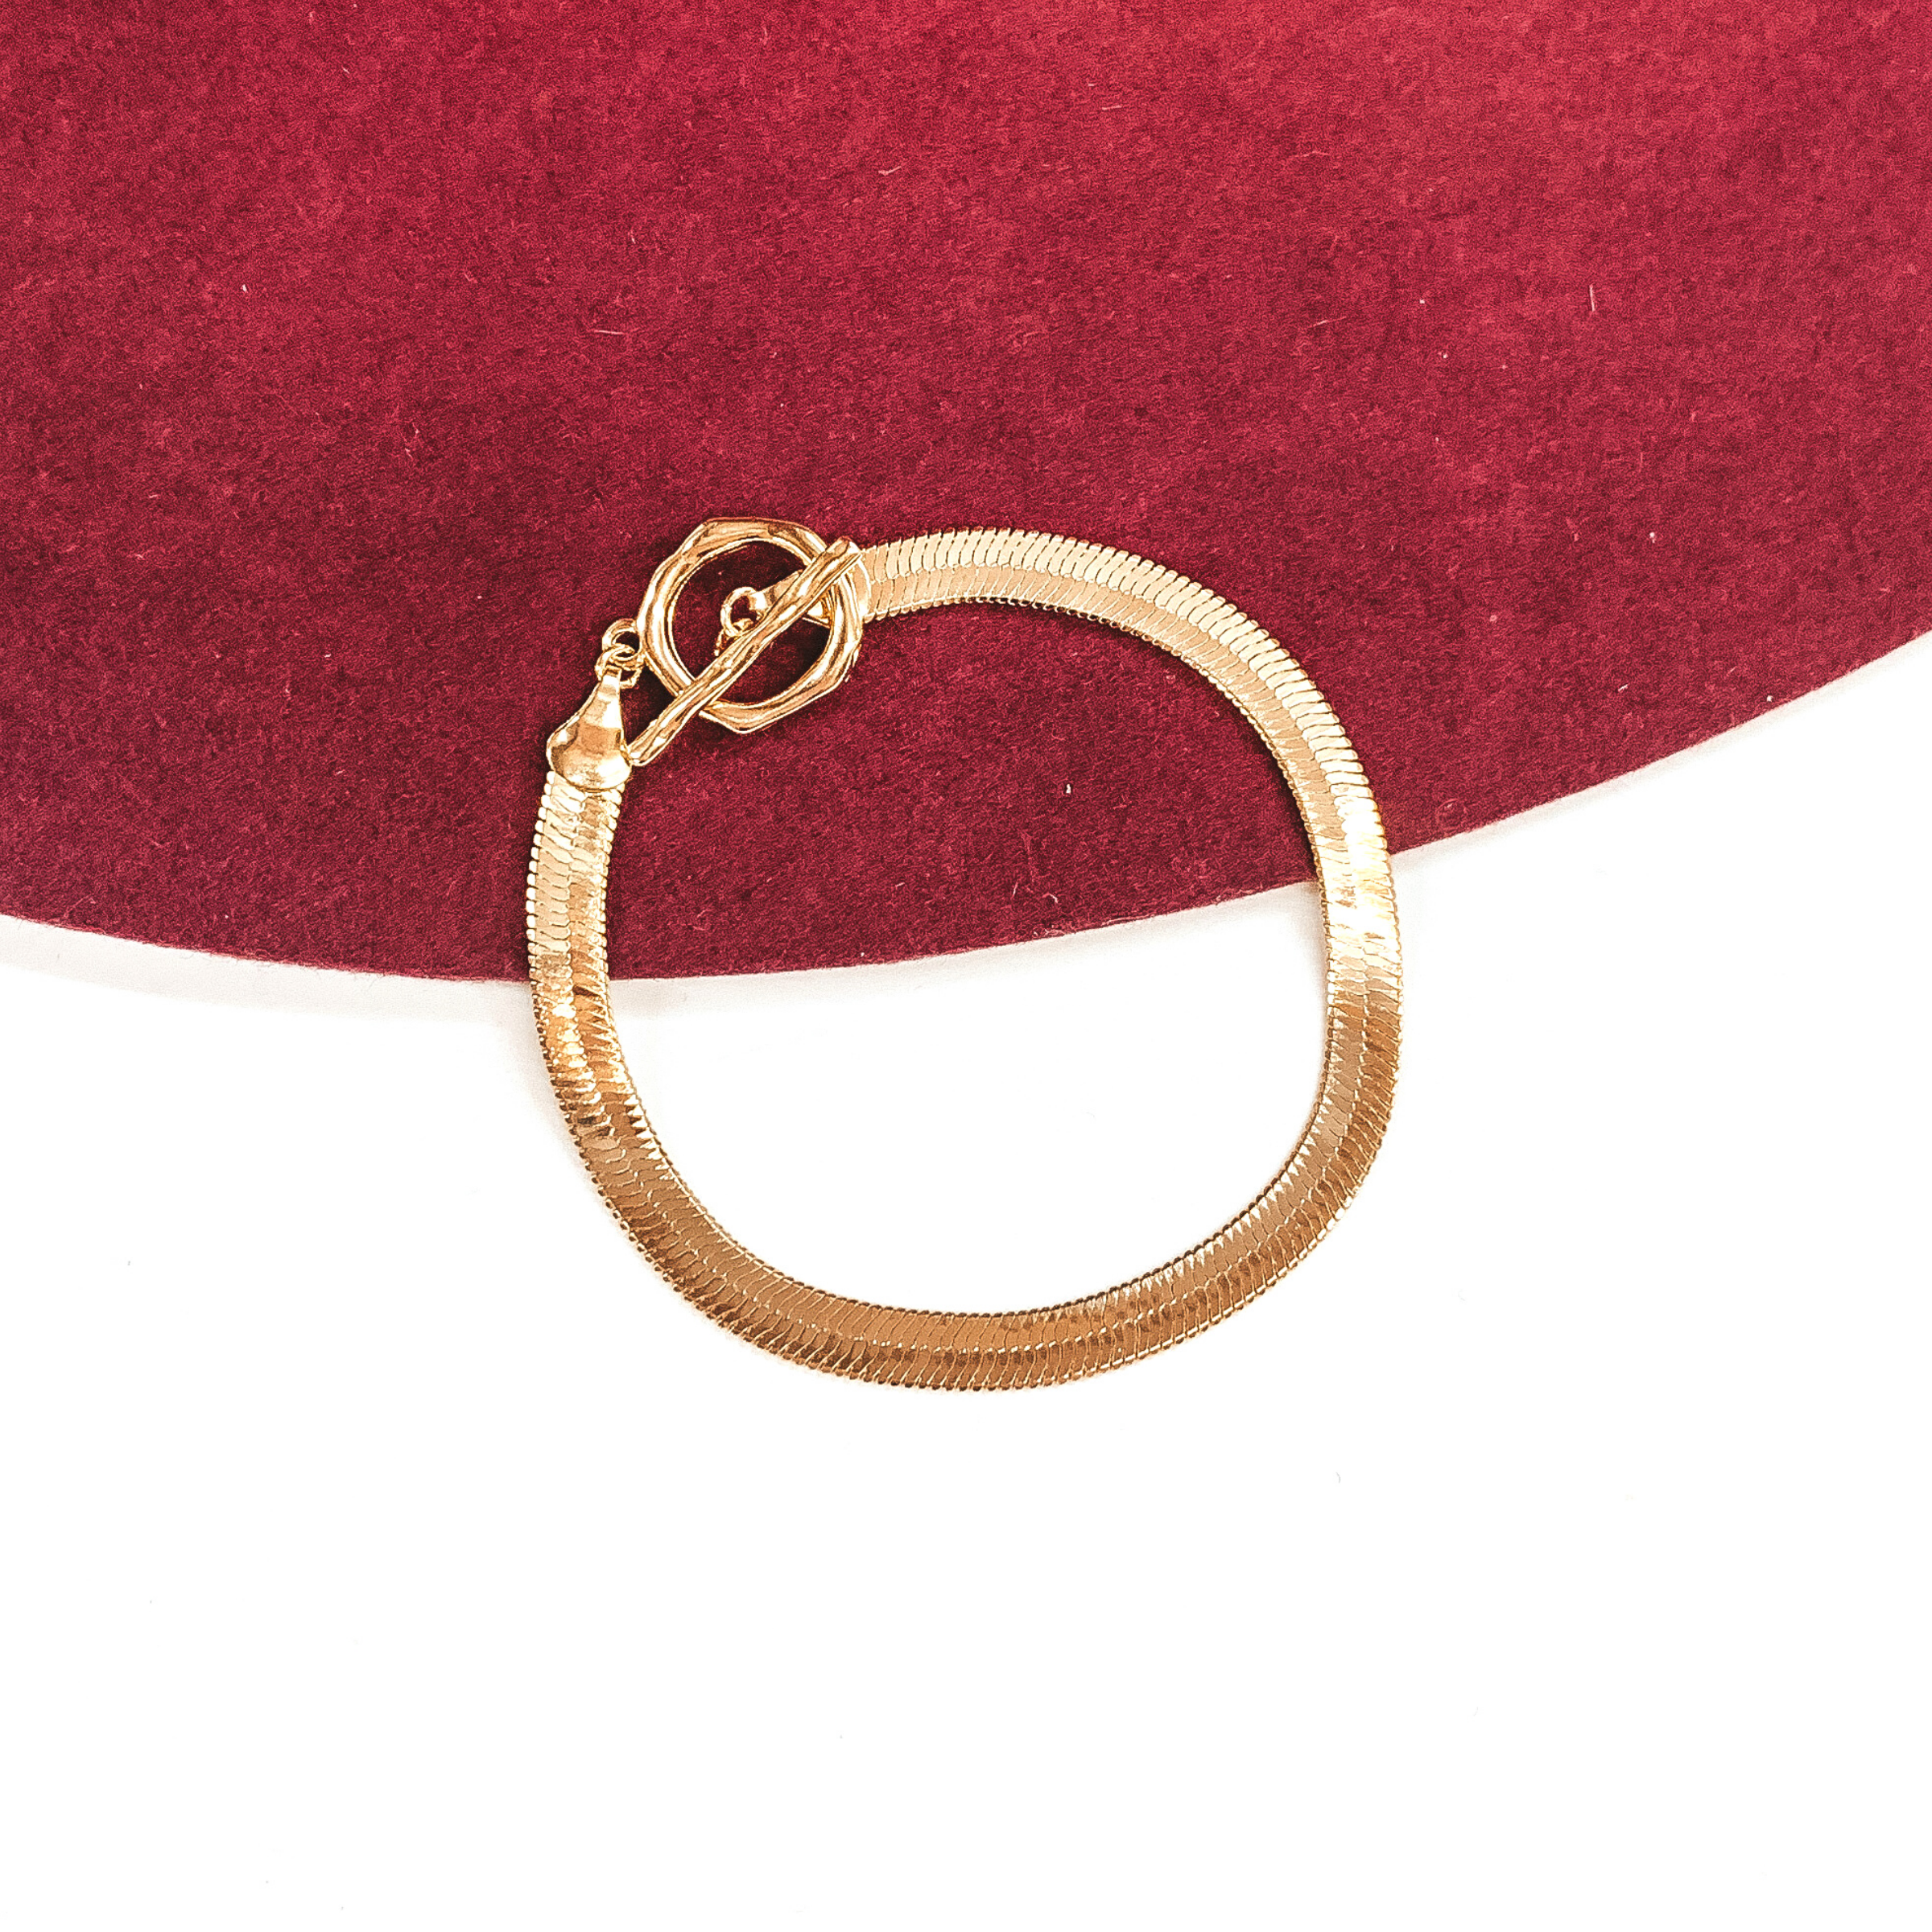 Gold herringbone bracelet that closes with a toggle clasp. This bracelet is pictured on a white and red background.